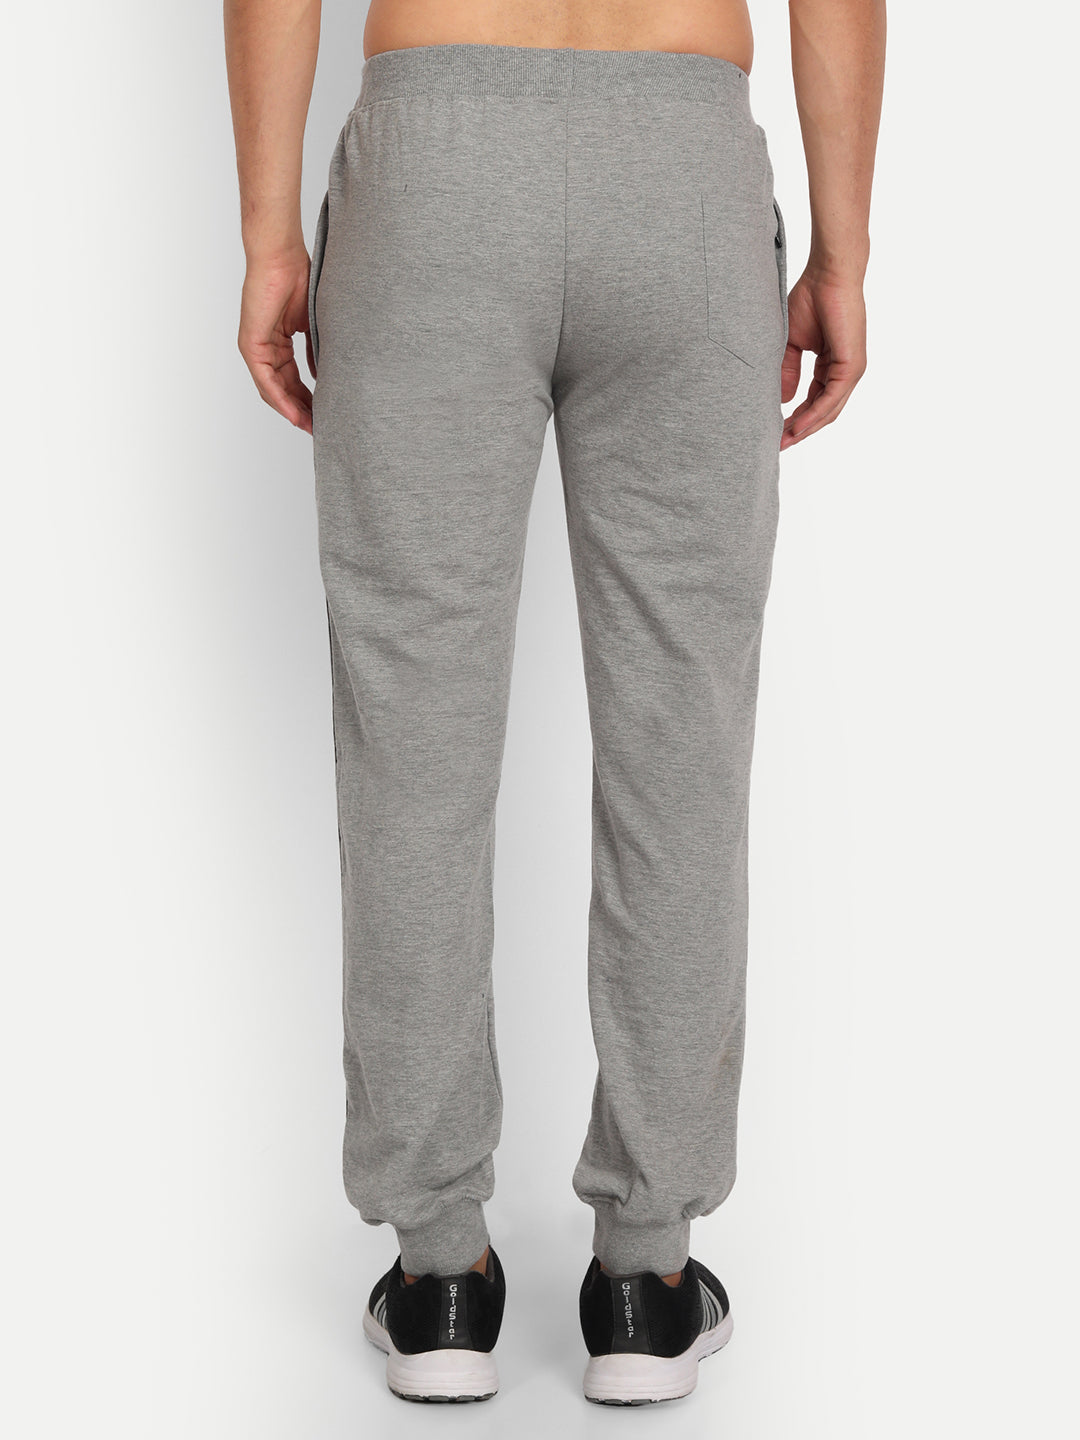 Premium jogging trousers with lots of details in grey / melange